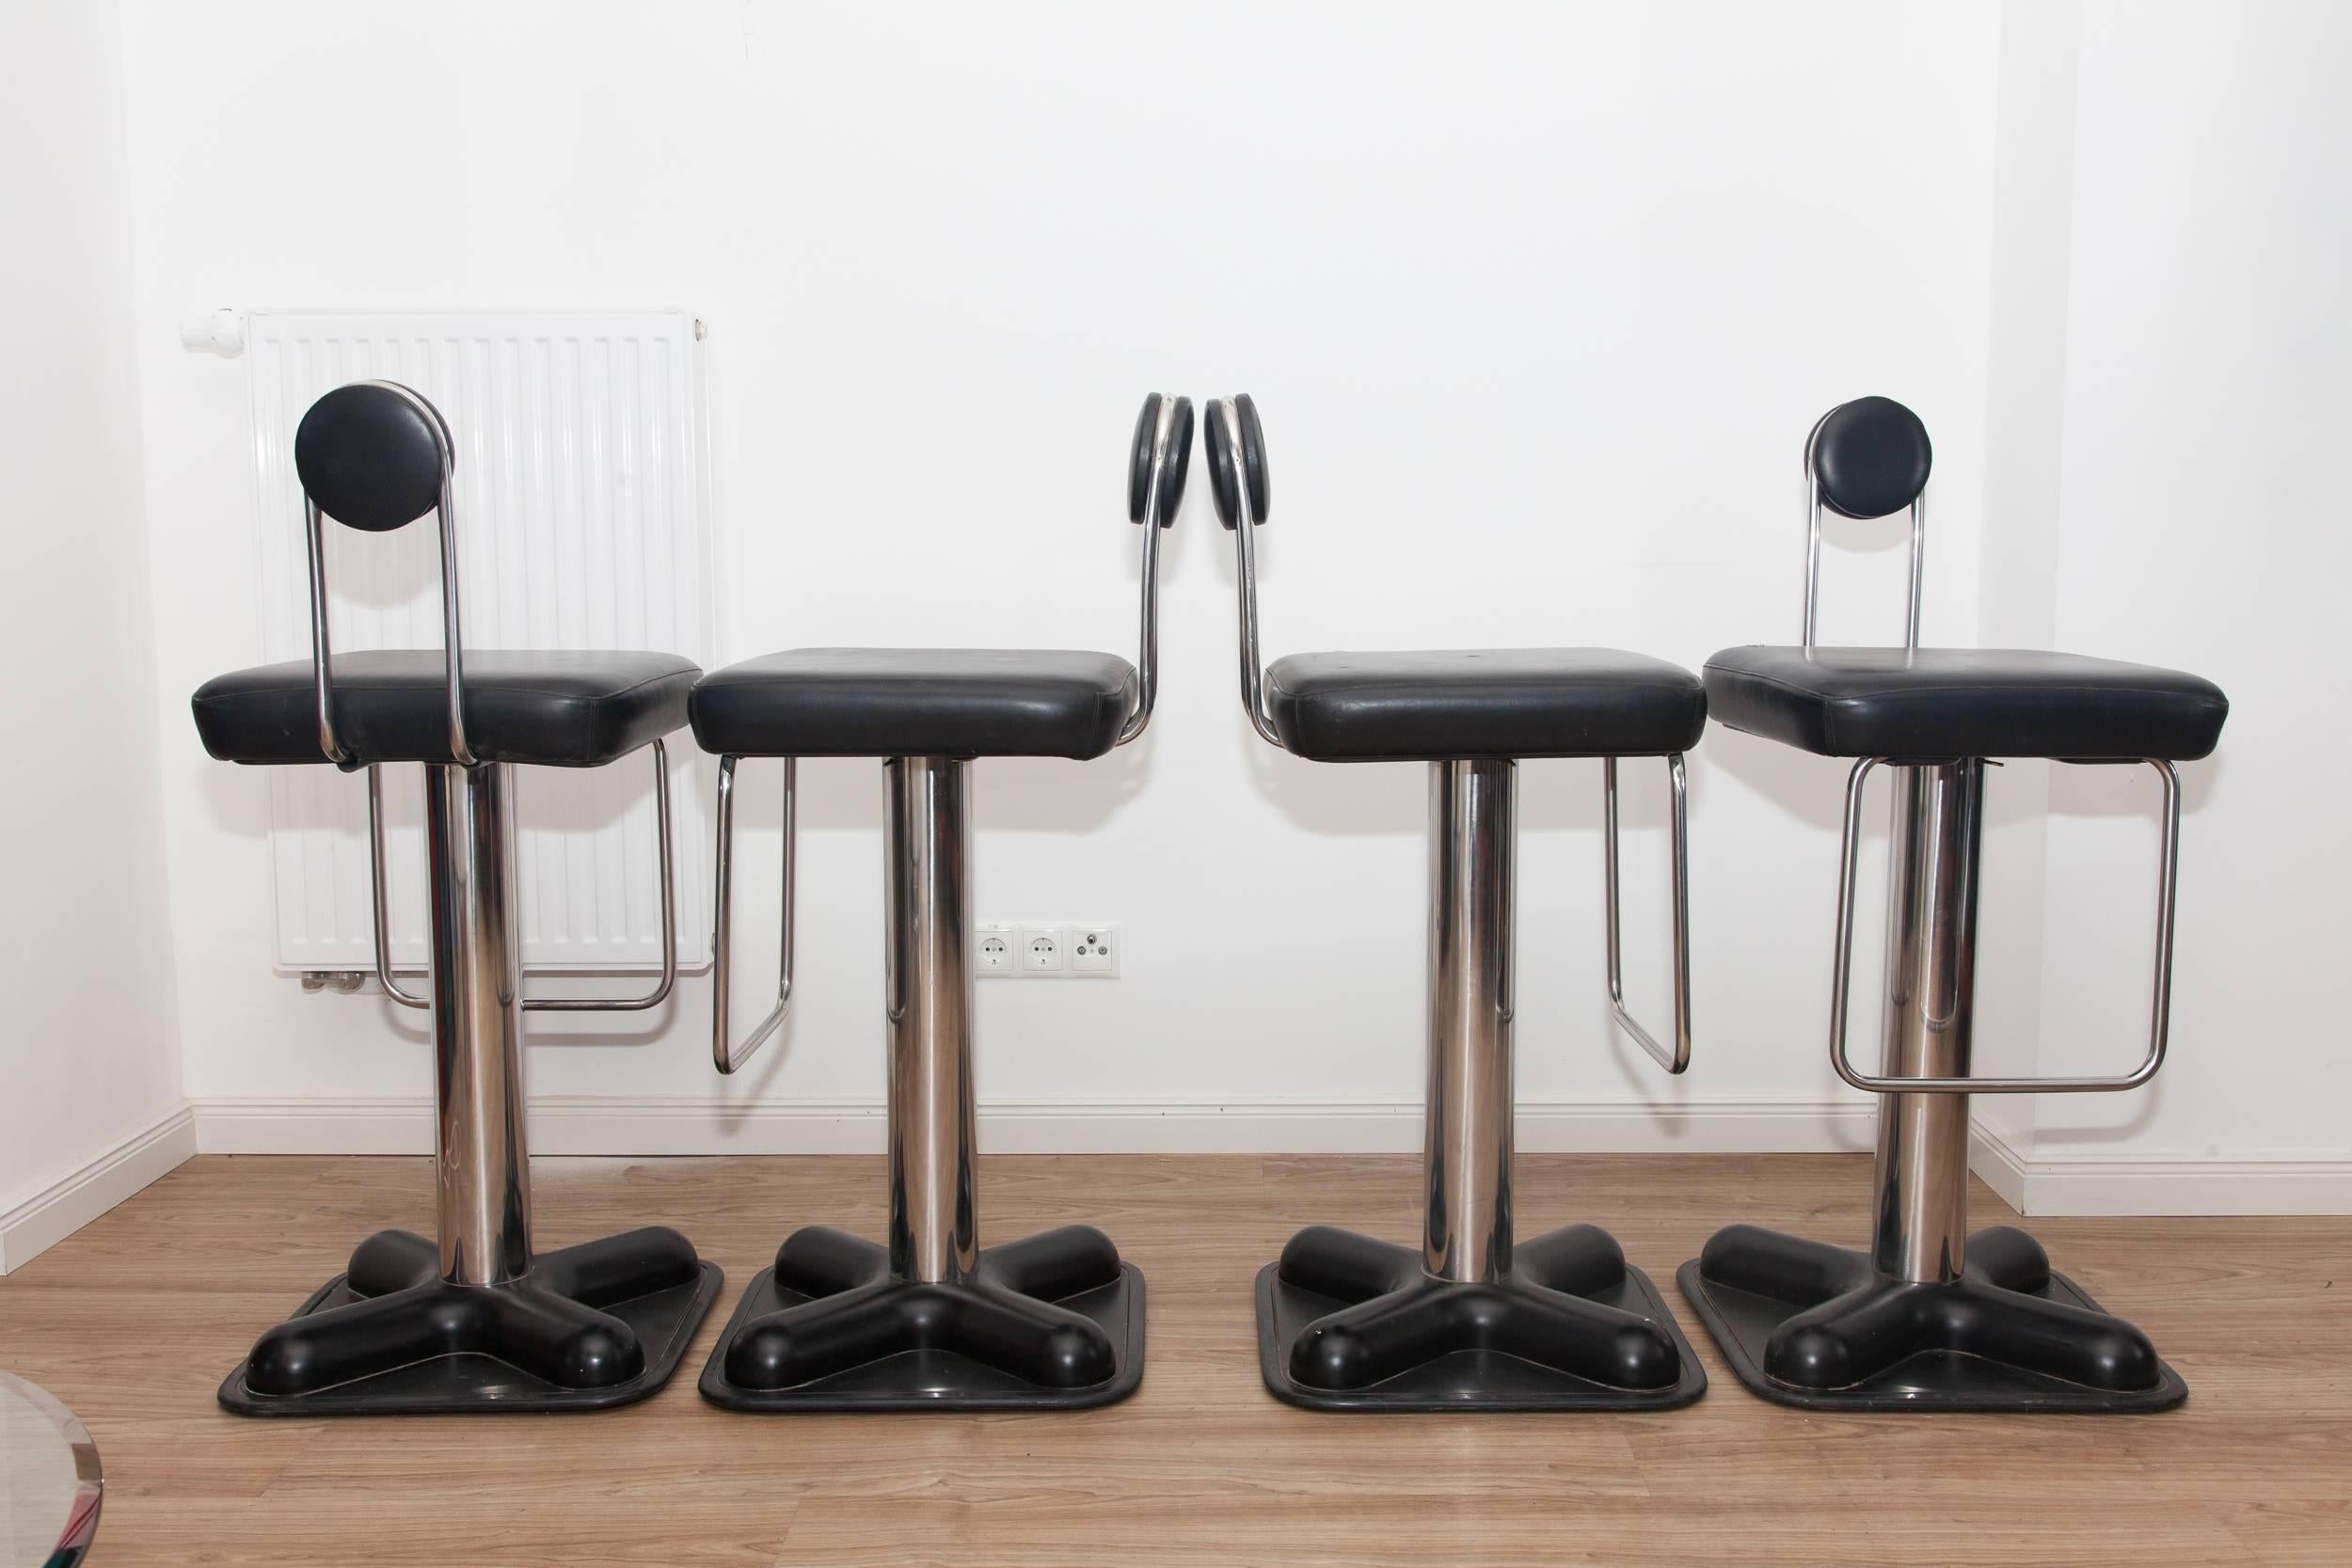 These four bar stools, model Birillo, were designed in 1971 for Zanotta. They feature black leather upholstery and a chromed metal base with a black lacquered plastic foot. The design was awarded the golden medal at the International Exhibition